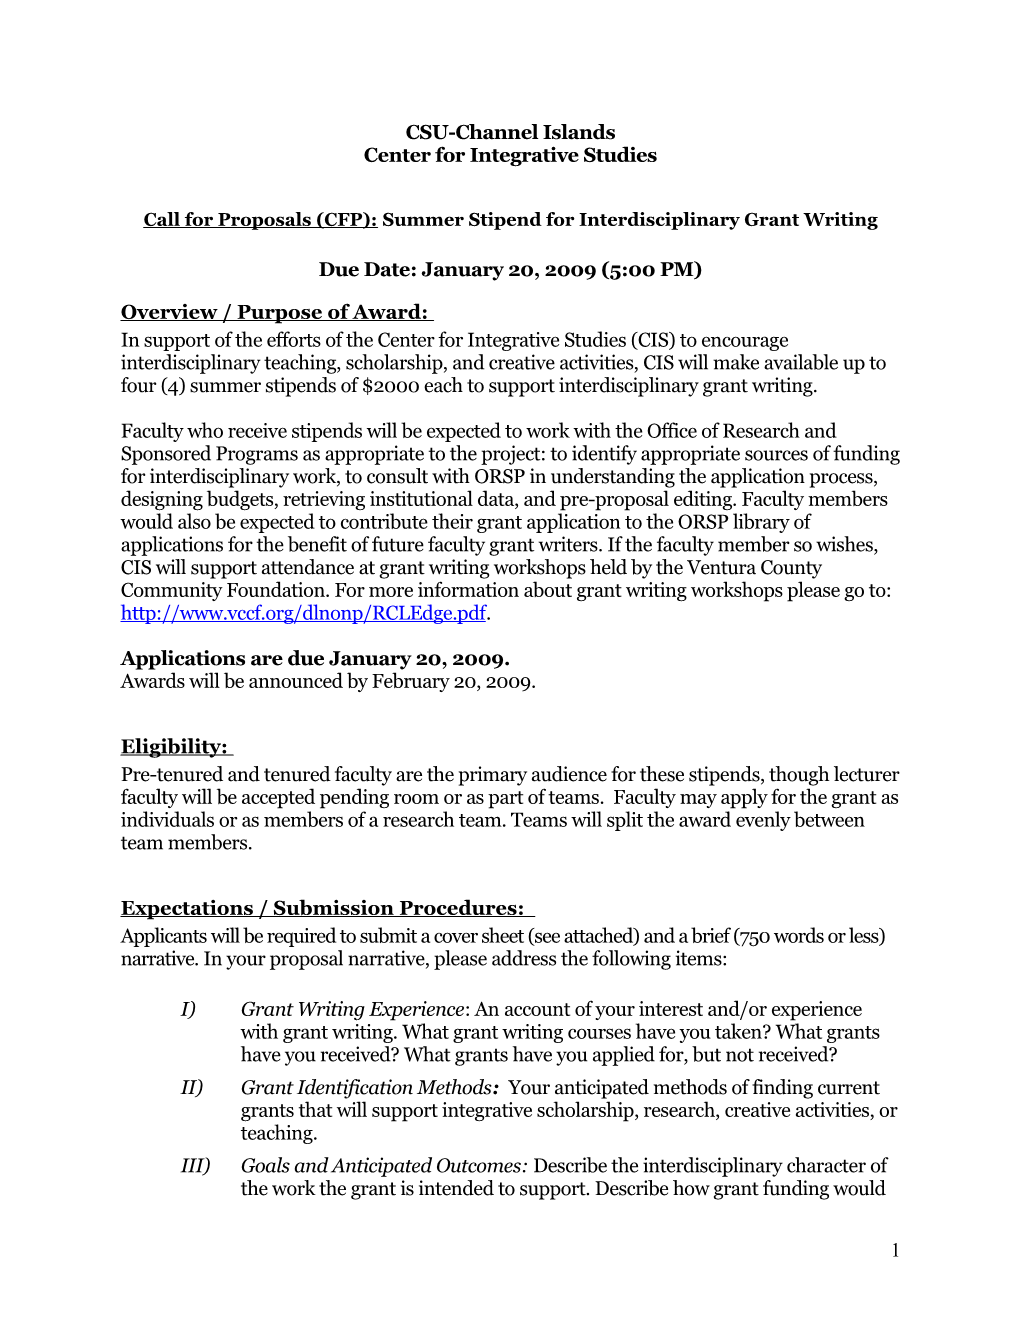 Call for Proposals: Summer Stipend for Interdisciplinary Grant Writing